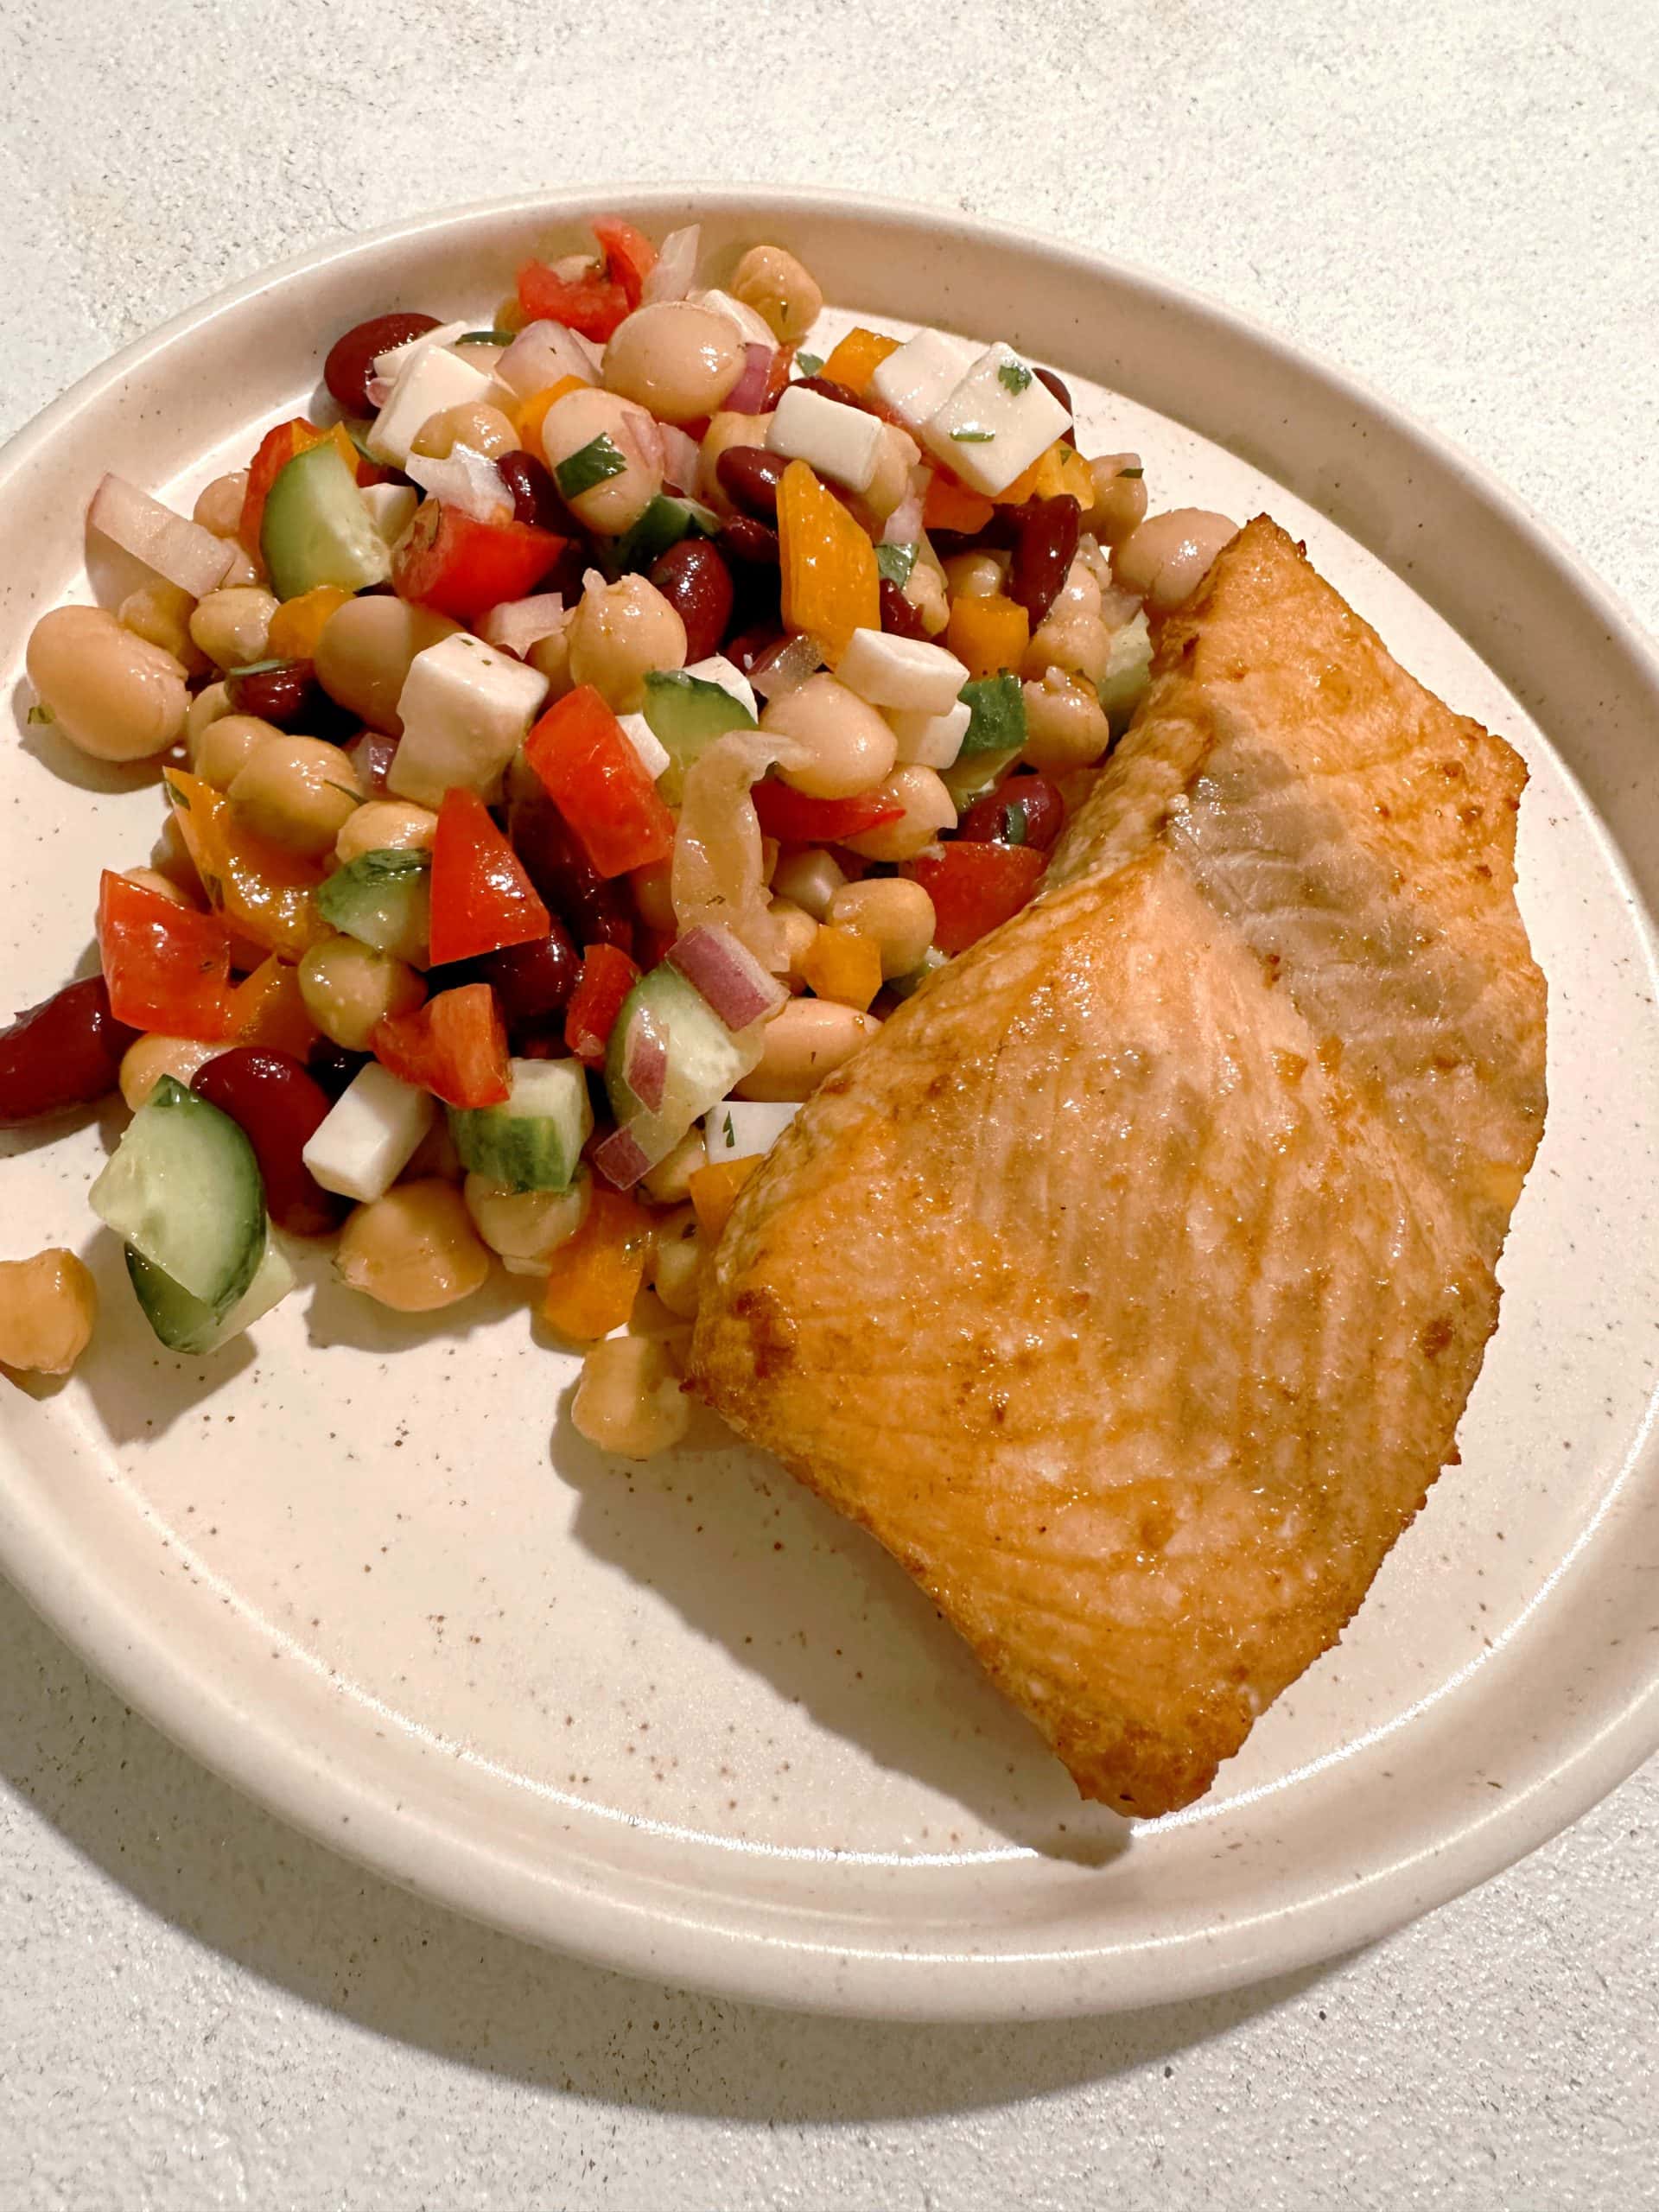 A Symphony of Flavors: Roasted Salmon with a Vibrant Mixed Bean Salad